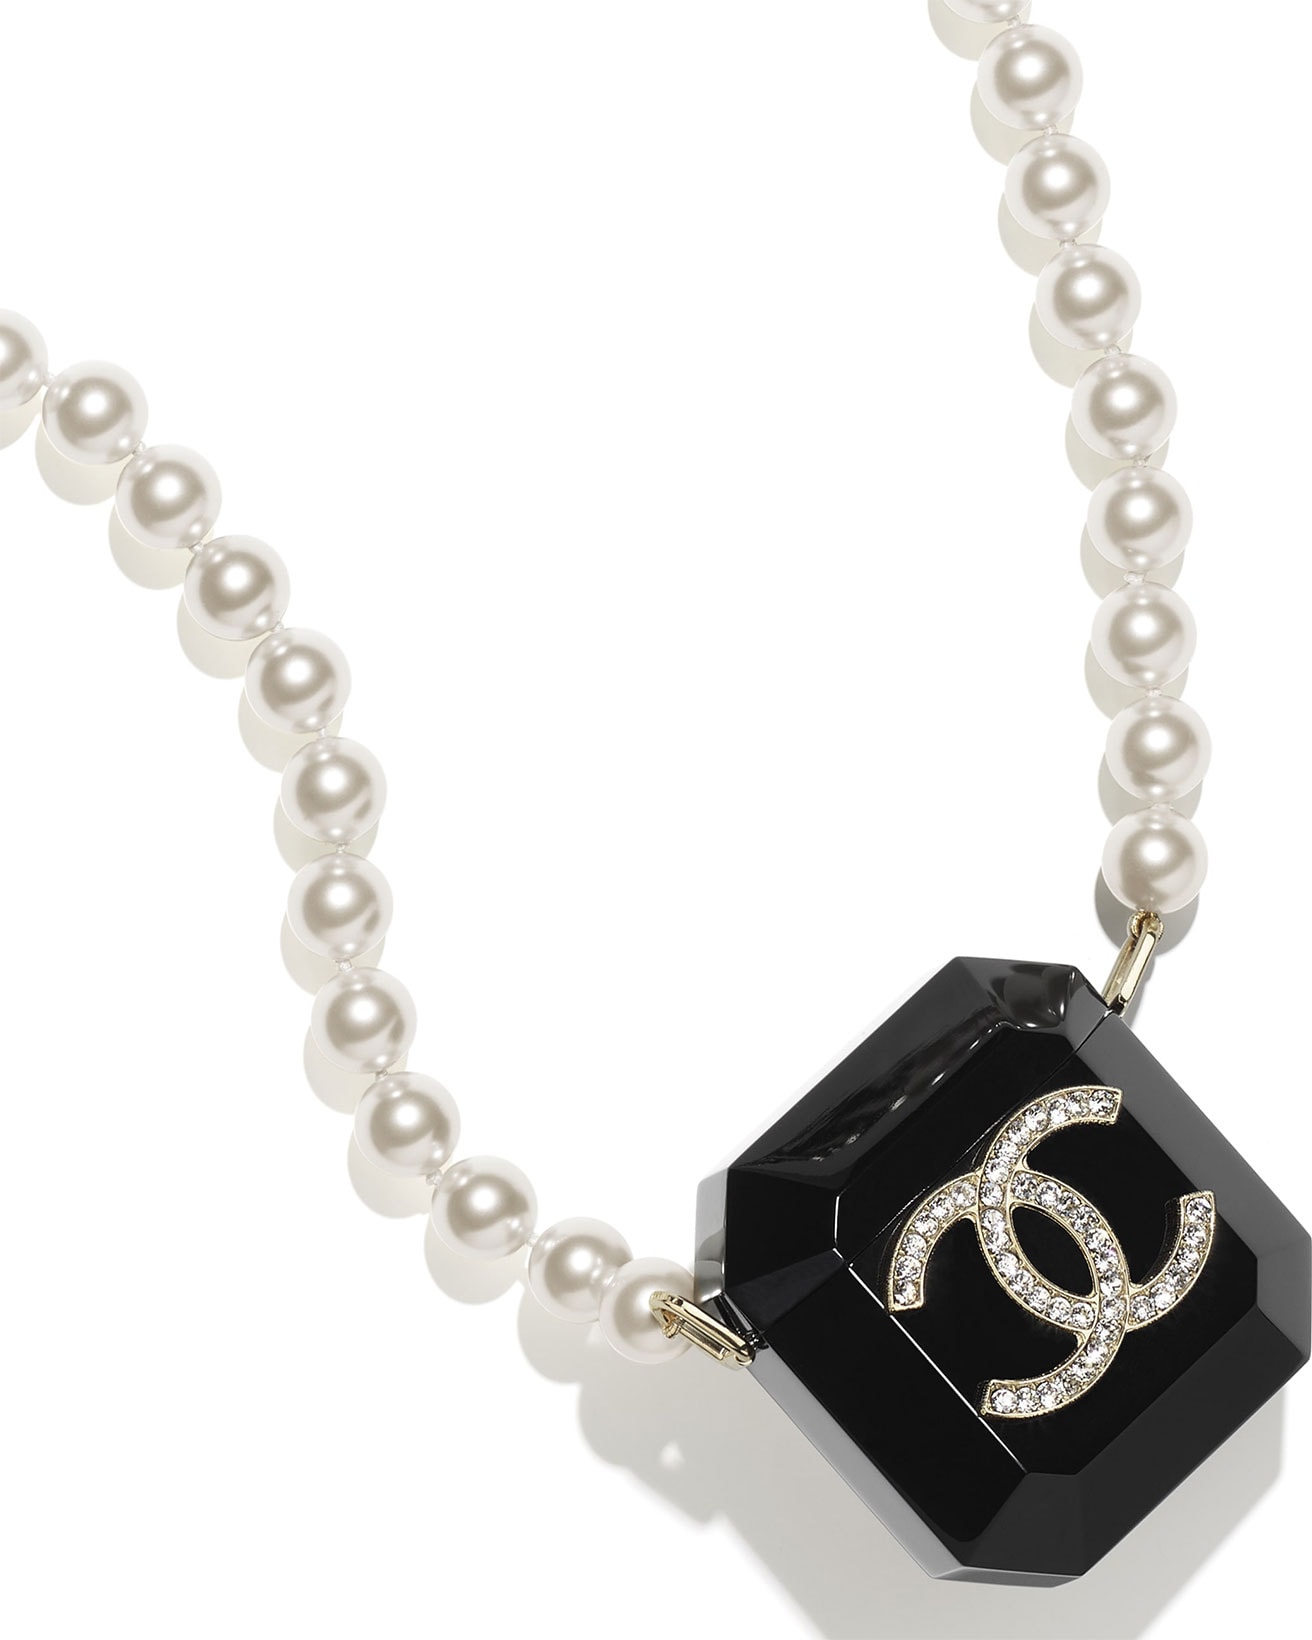 chanel apple airpods cases black necklace pearls crystals